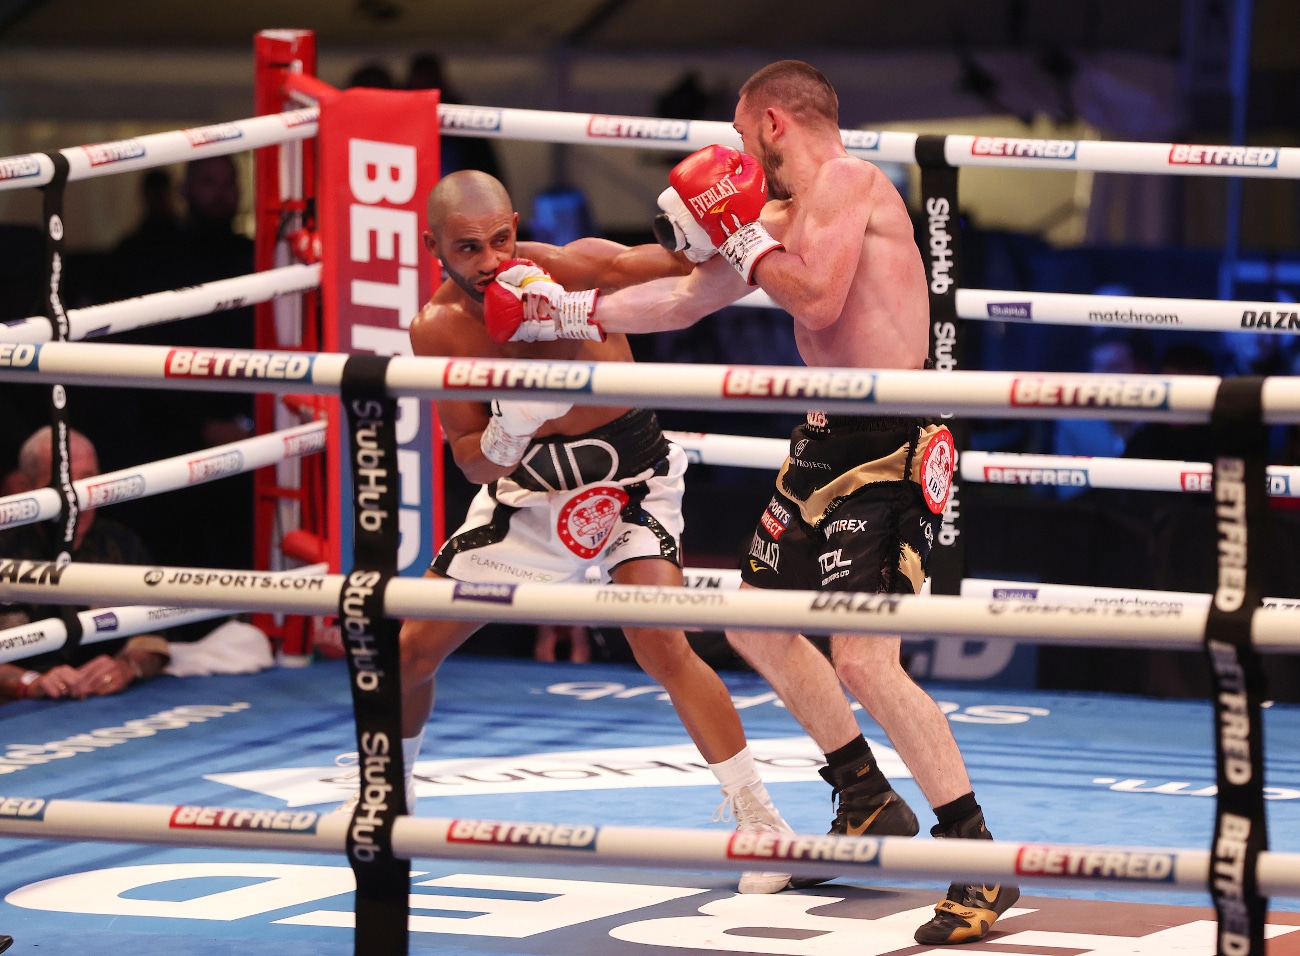 Image: Boxing Results: Kid Galahad stops Jazza Dickens in 11th round